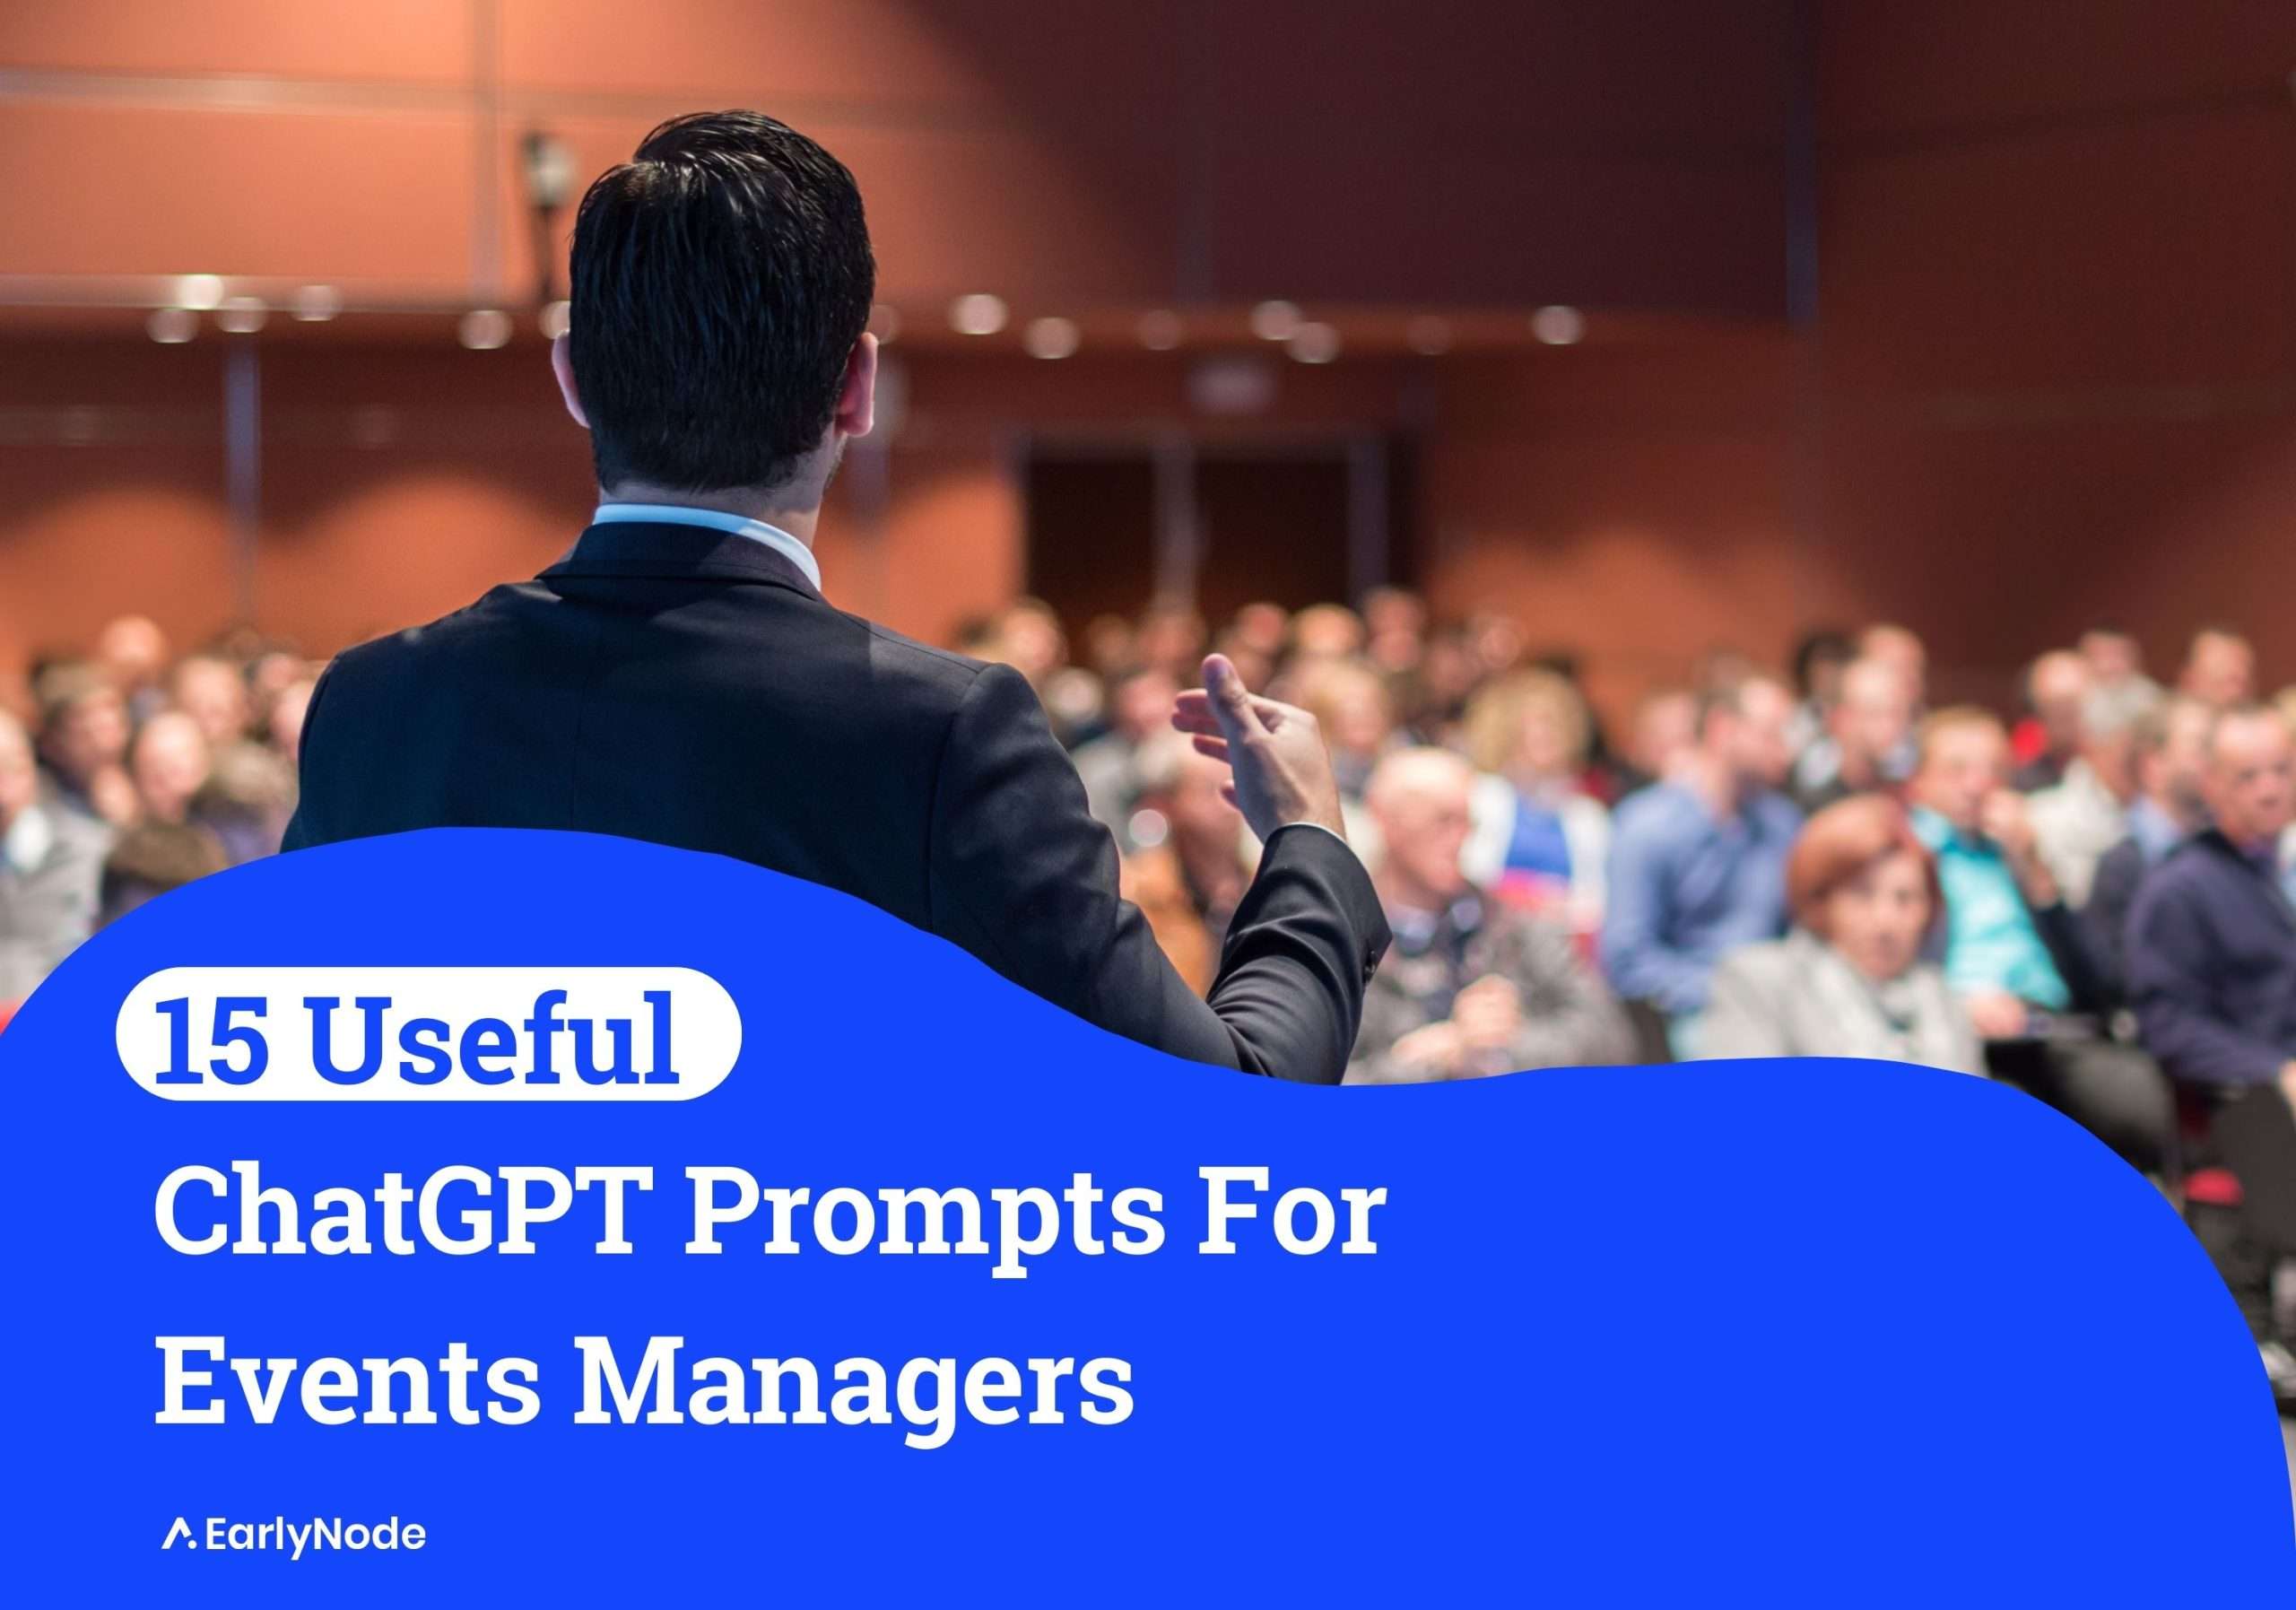 15 Helpful ChatGPT Prompts for Events Managers